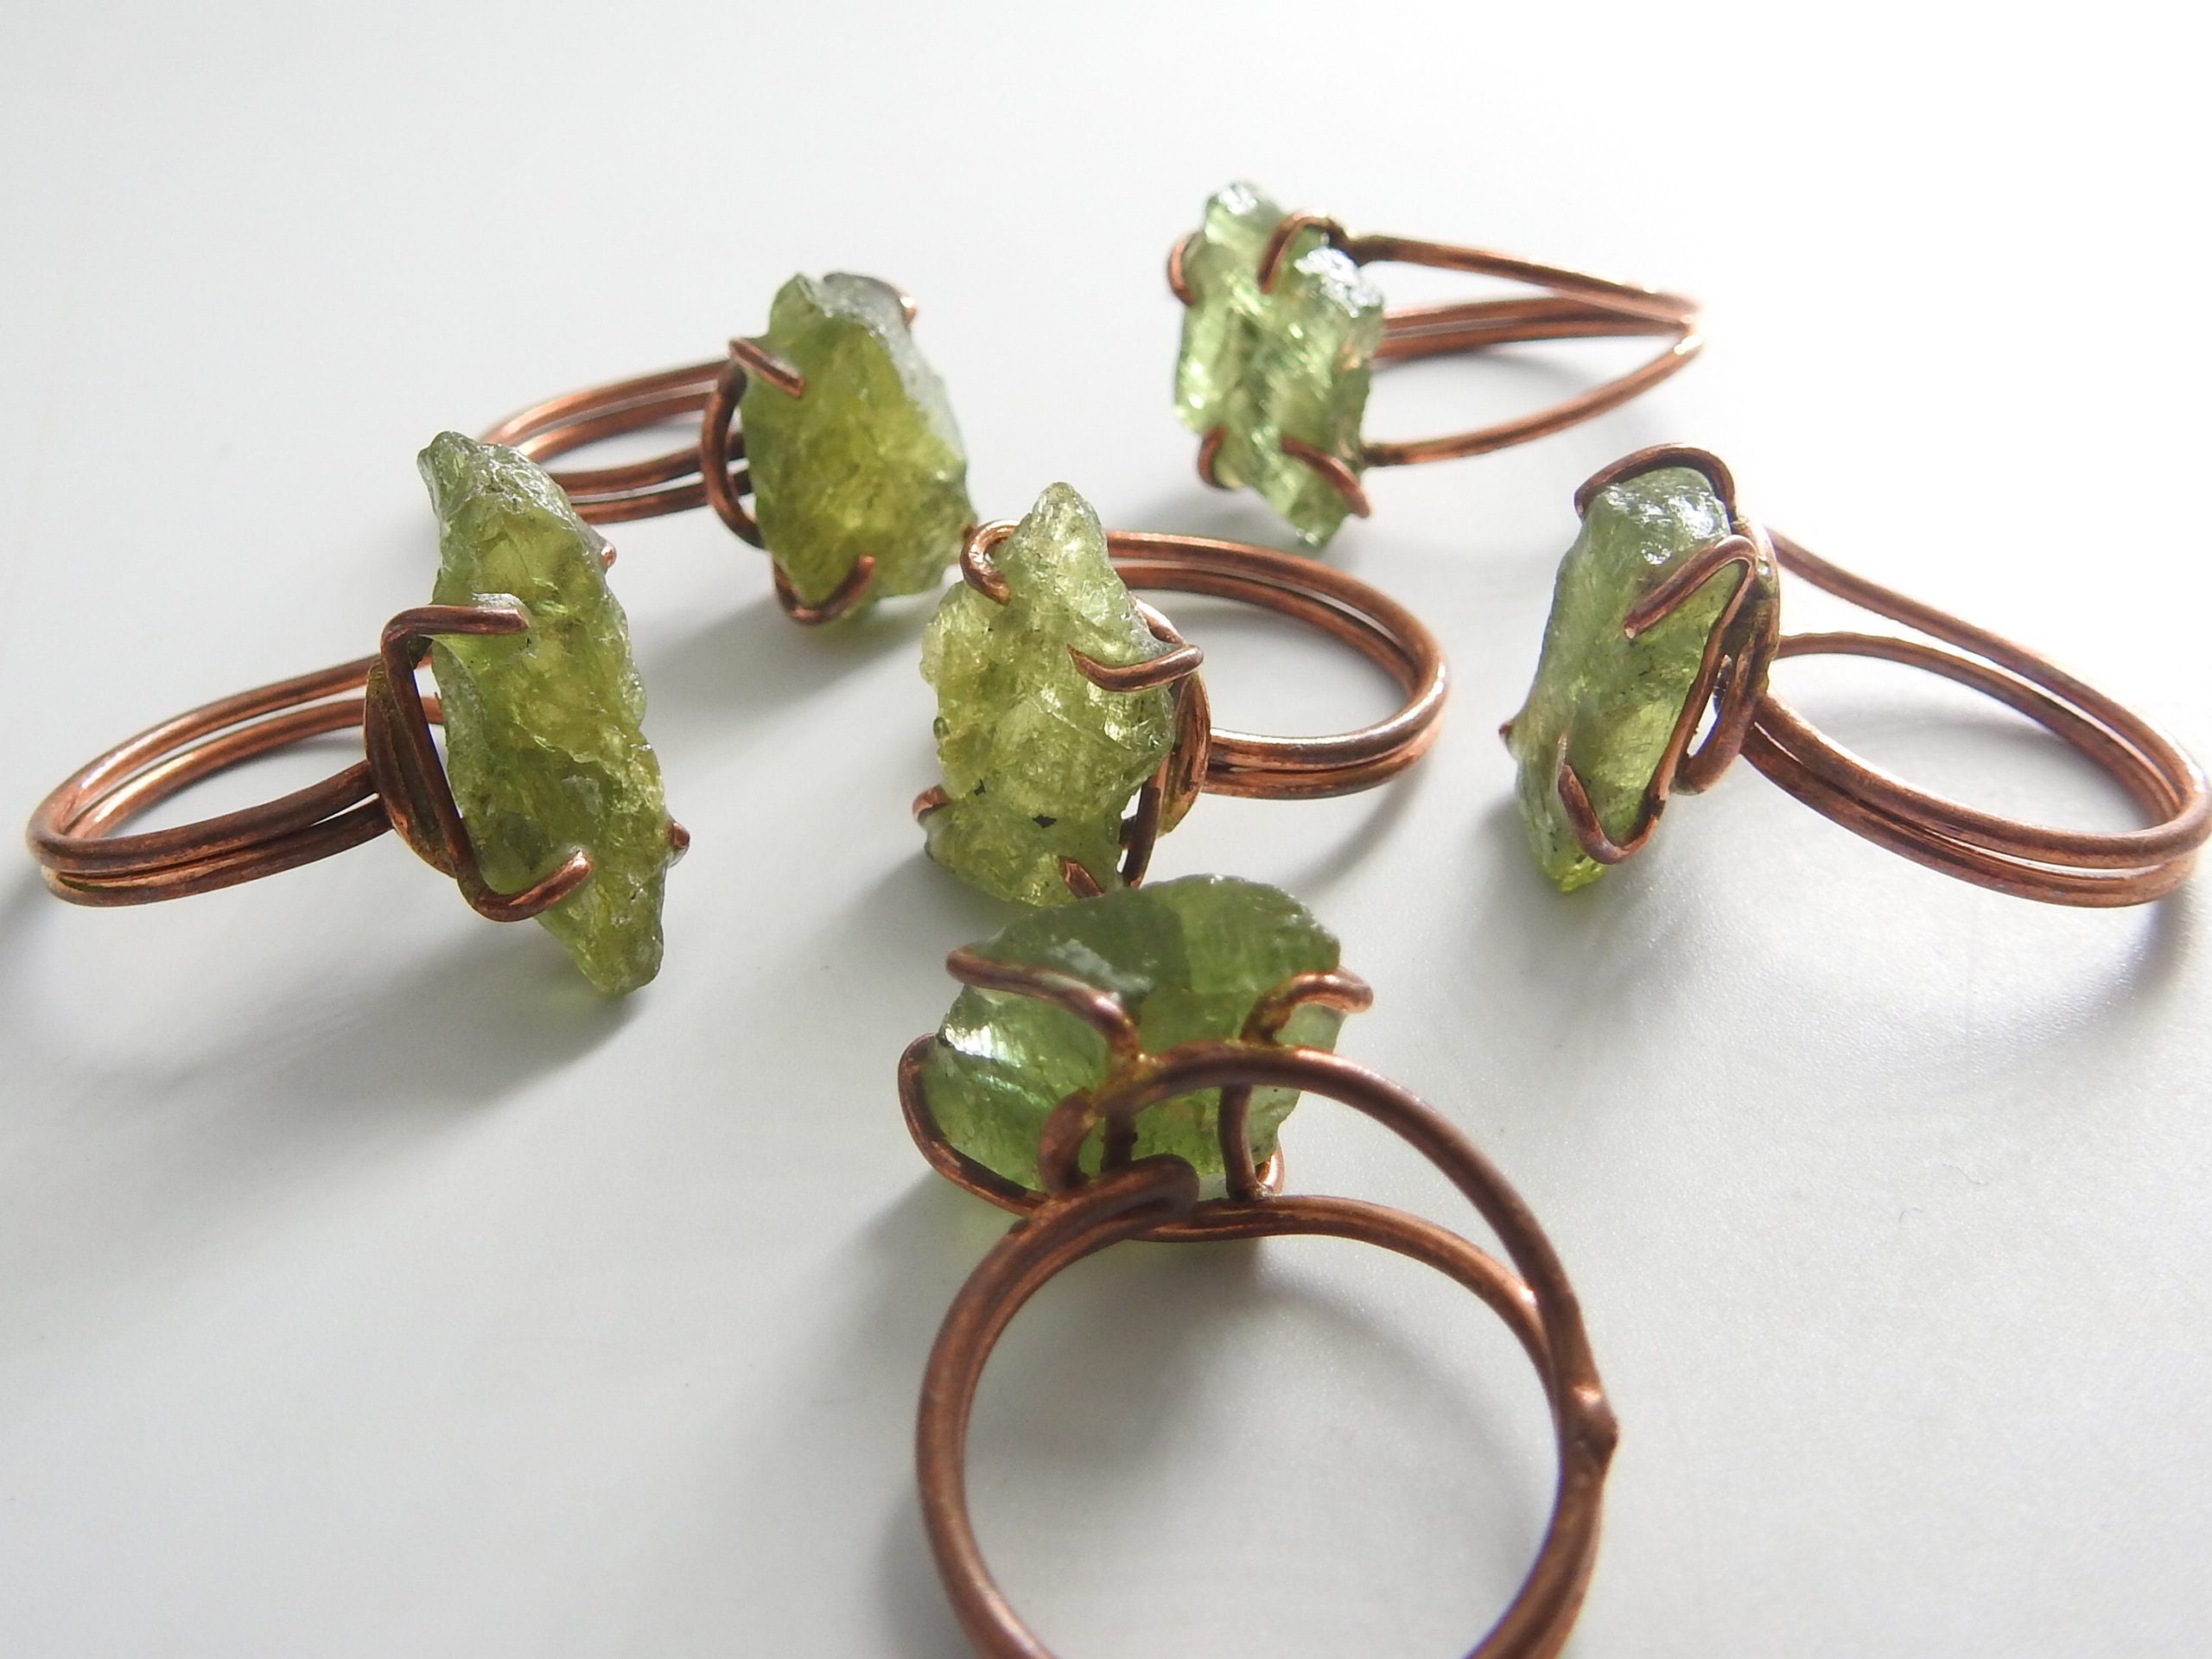 Grossular Garnet Rough Ring,Green,Wire Wrapping,Copper,Adjustable,Wire-Wrapped,Minerals Stone,One Of A Kind 15-20MM Long CJ-1 | Save 33% - Rajasthan Living 16